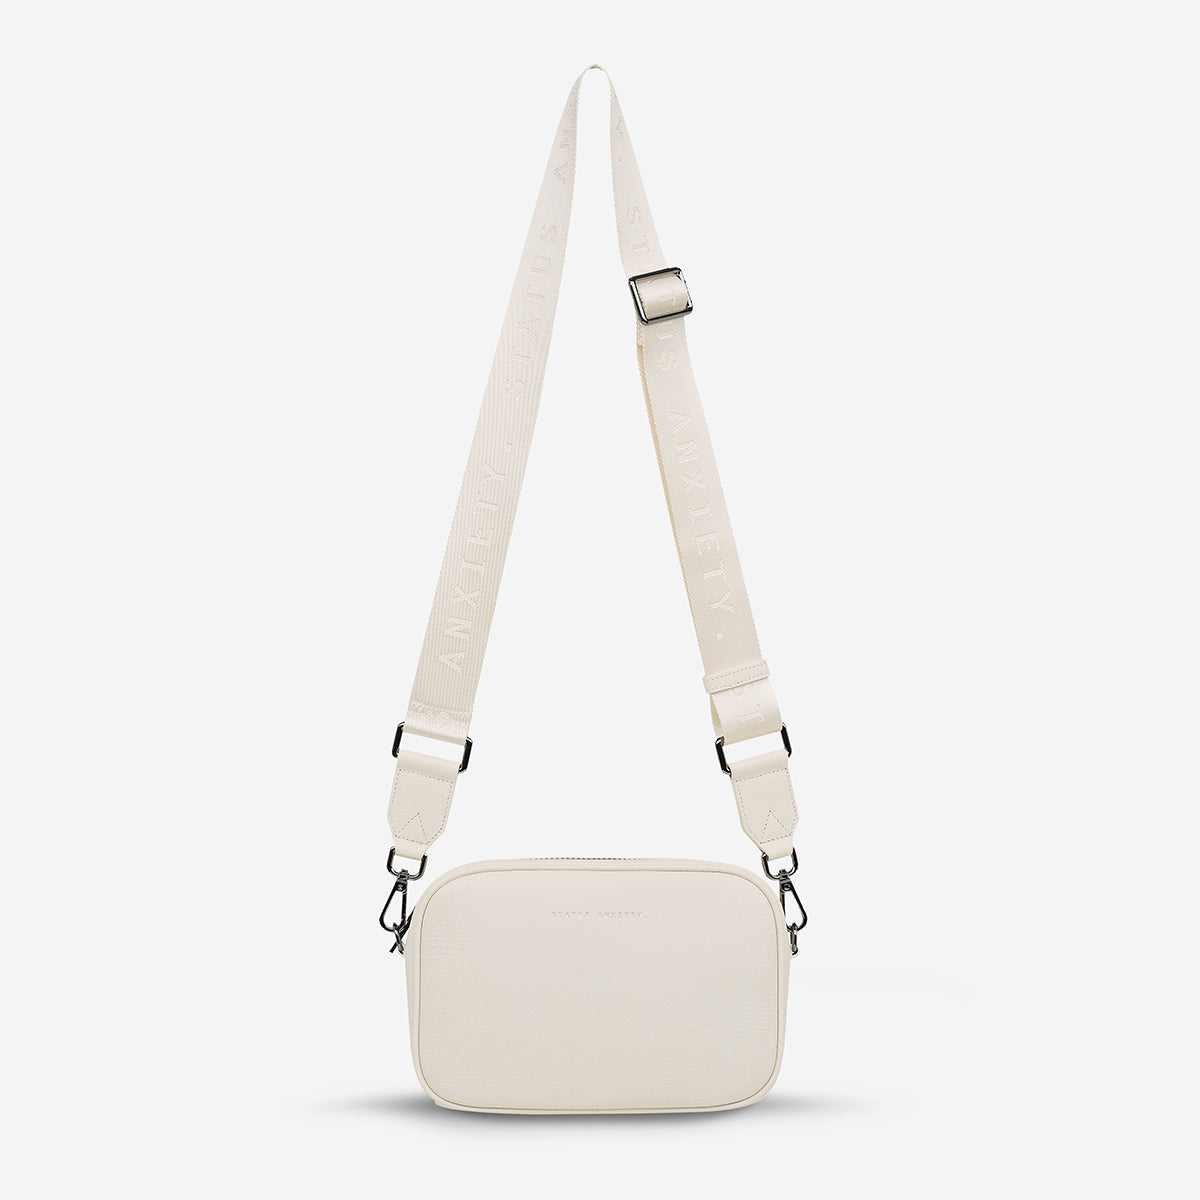 status-anxiety-bag-plunder-webbed-strap-chalk-front-hanging.jpg